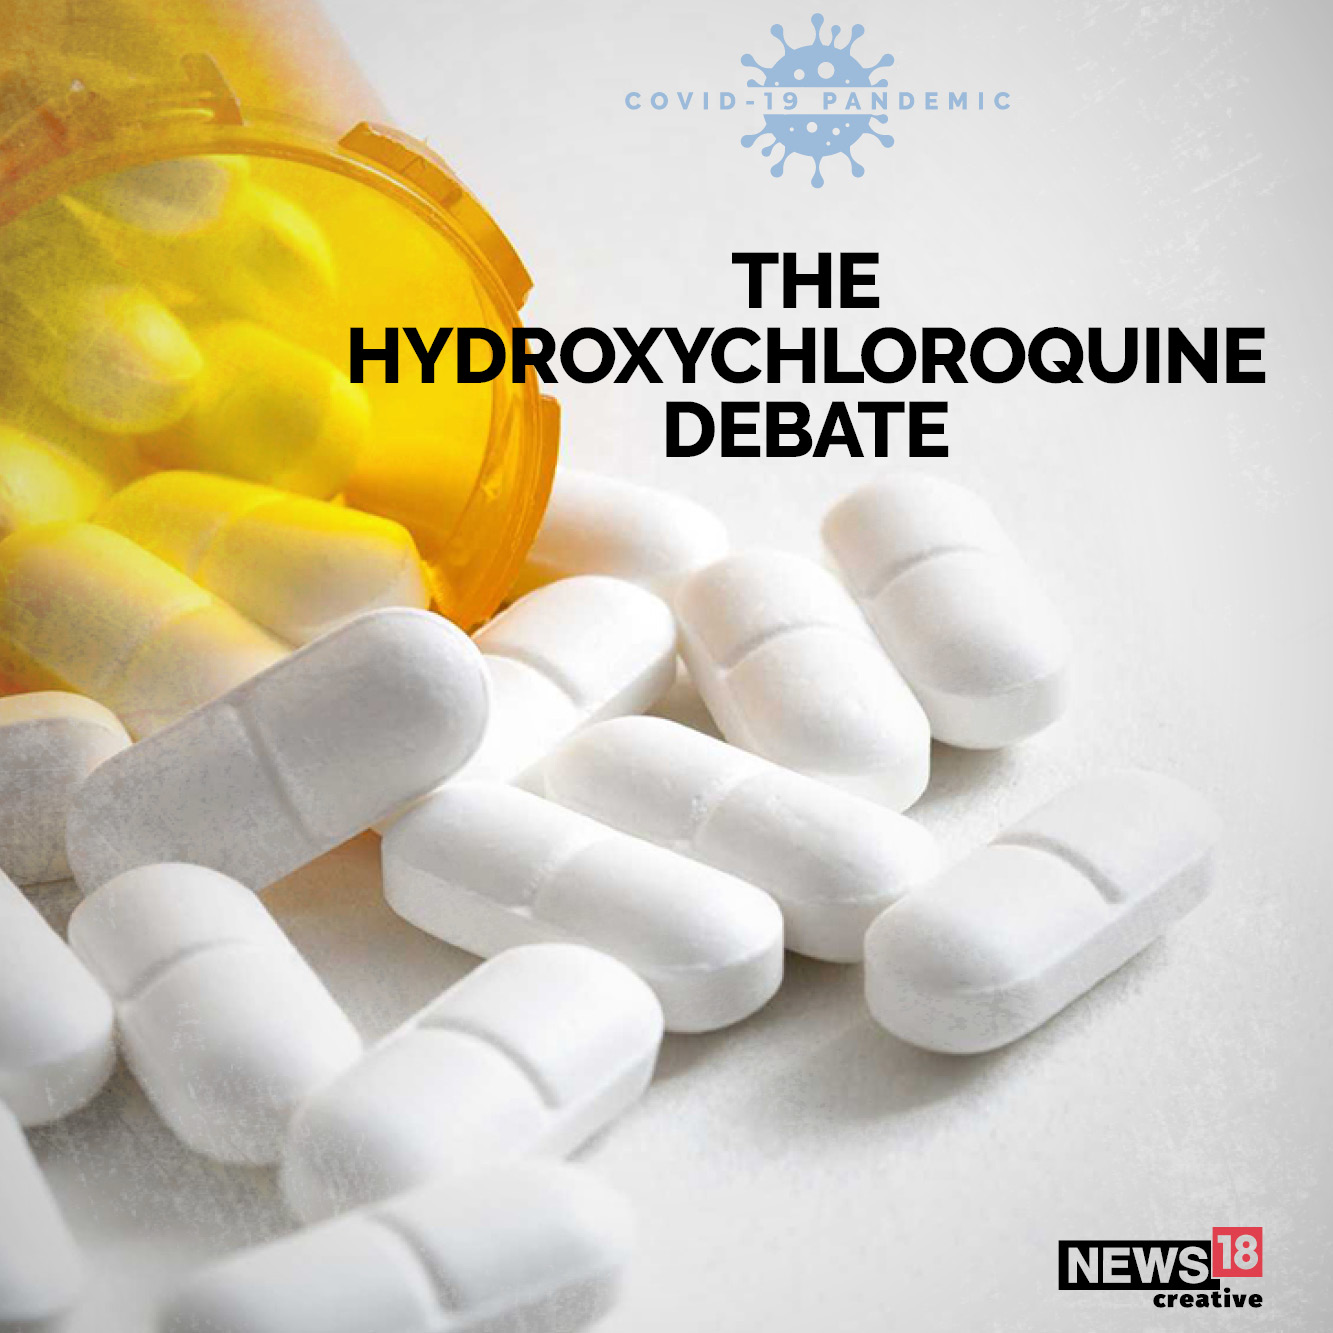 What is Hydroxylchroloquine and where does India fit in?